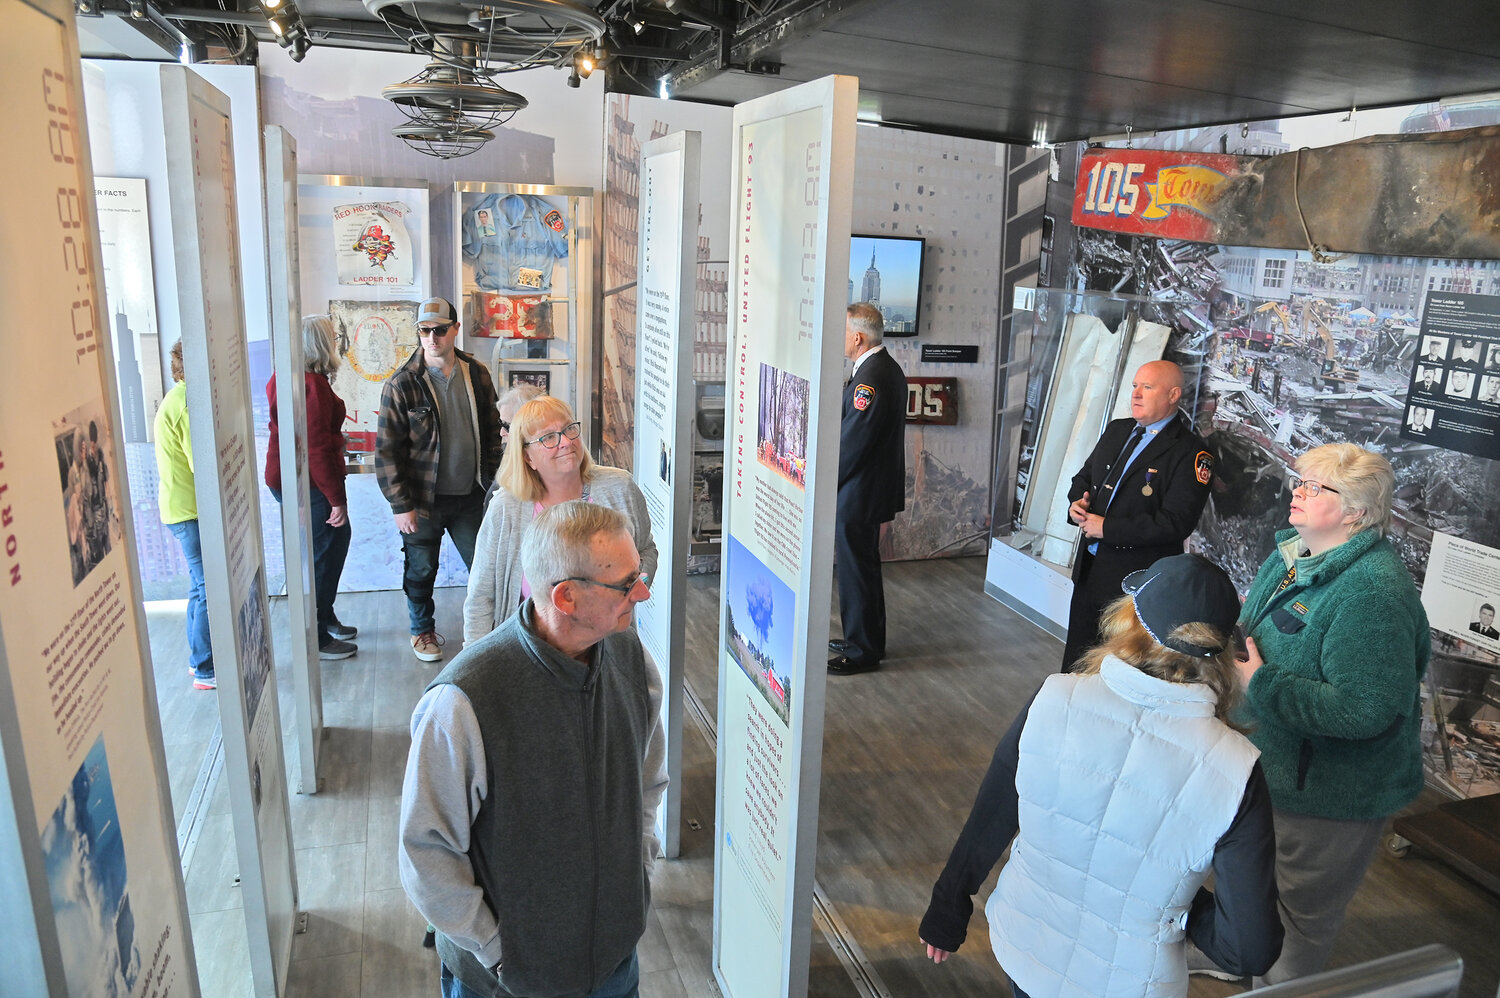 People tour the Tunnel to Towers 9/11 Never Forget Mobile Exhibit to Griffiss Technology Park. The mobile exhibit will be free and open to the public through Sunday, April 20-23 from 10 a.m. to 4 p.m. each day.